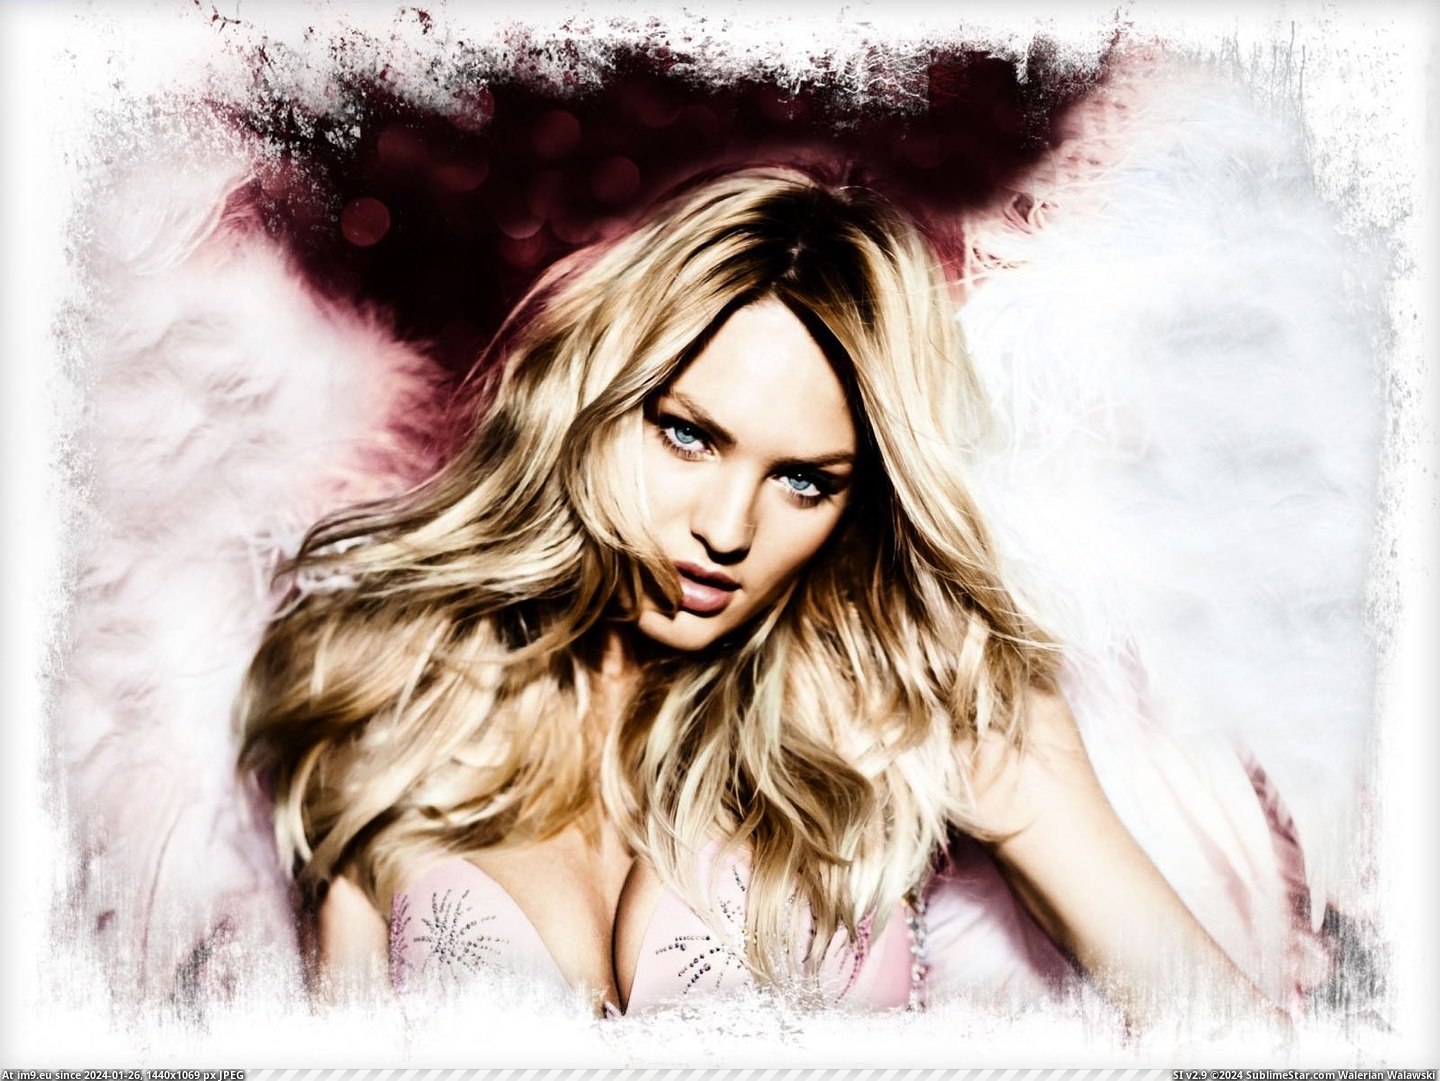 Candice Swanepoel Wallpapers 18 (in Hot Actress Candice Swanepoel)